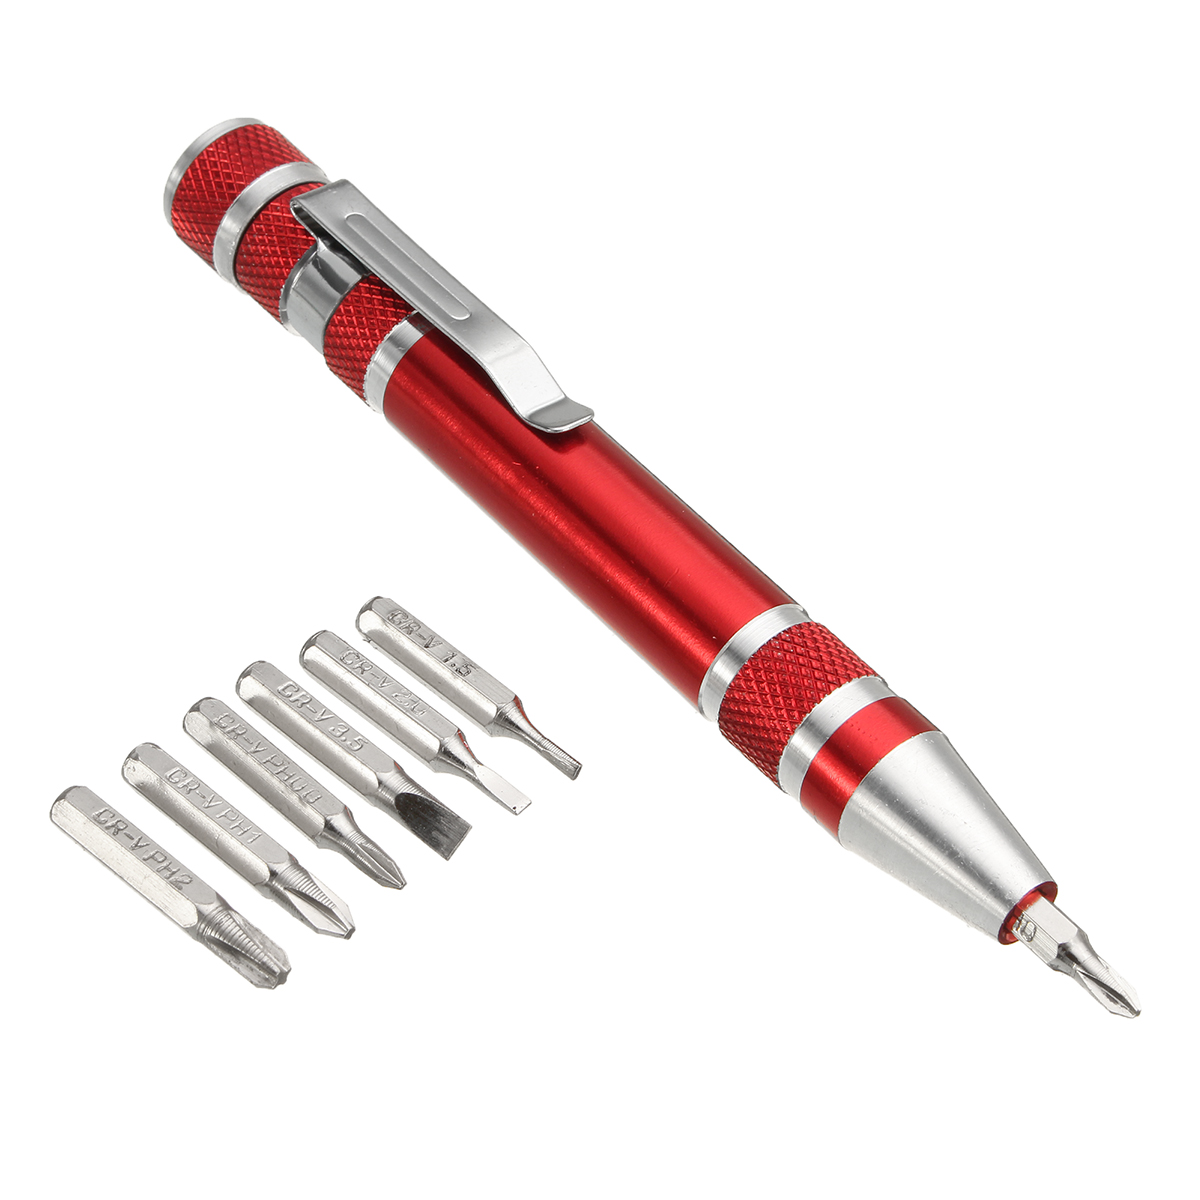 8-in-1-Pen-Style-Precision-Pocket-Screwdriver-Bit-Set-Slotted-Phillips-Screw-1107792-1